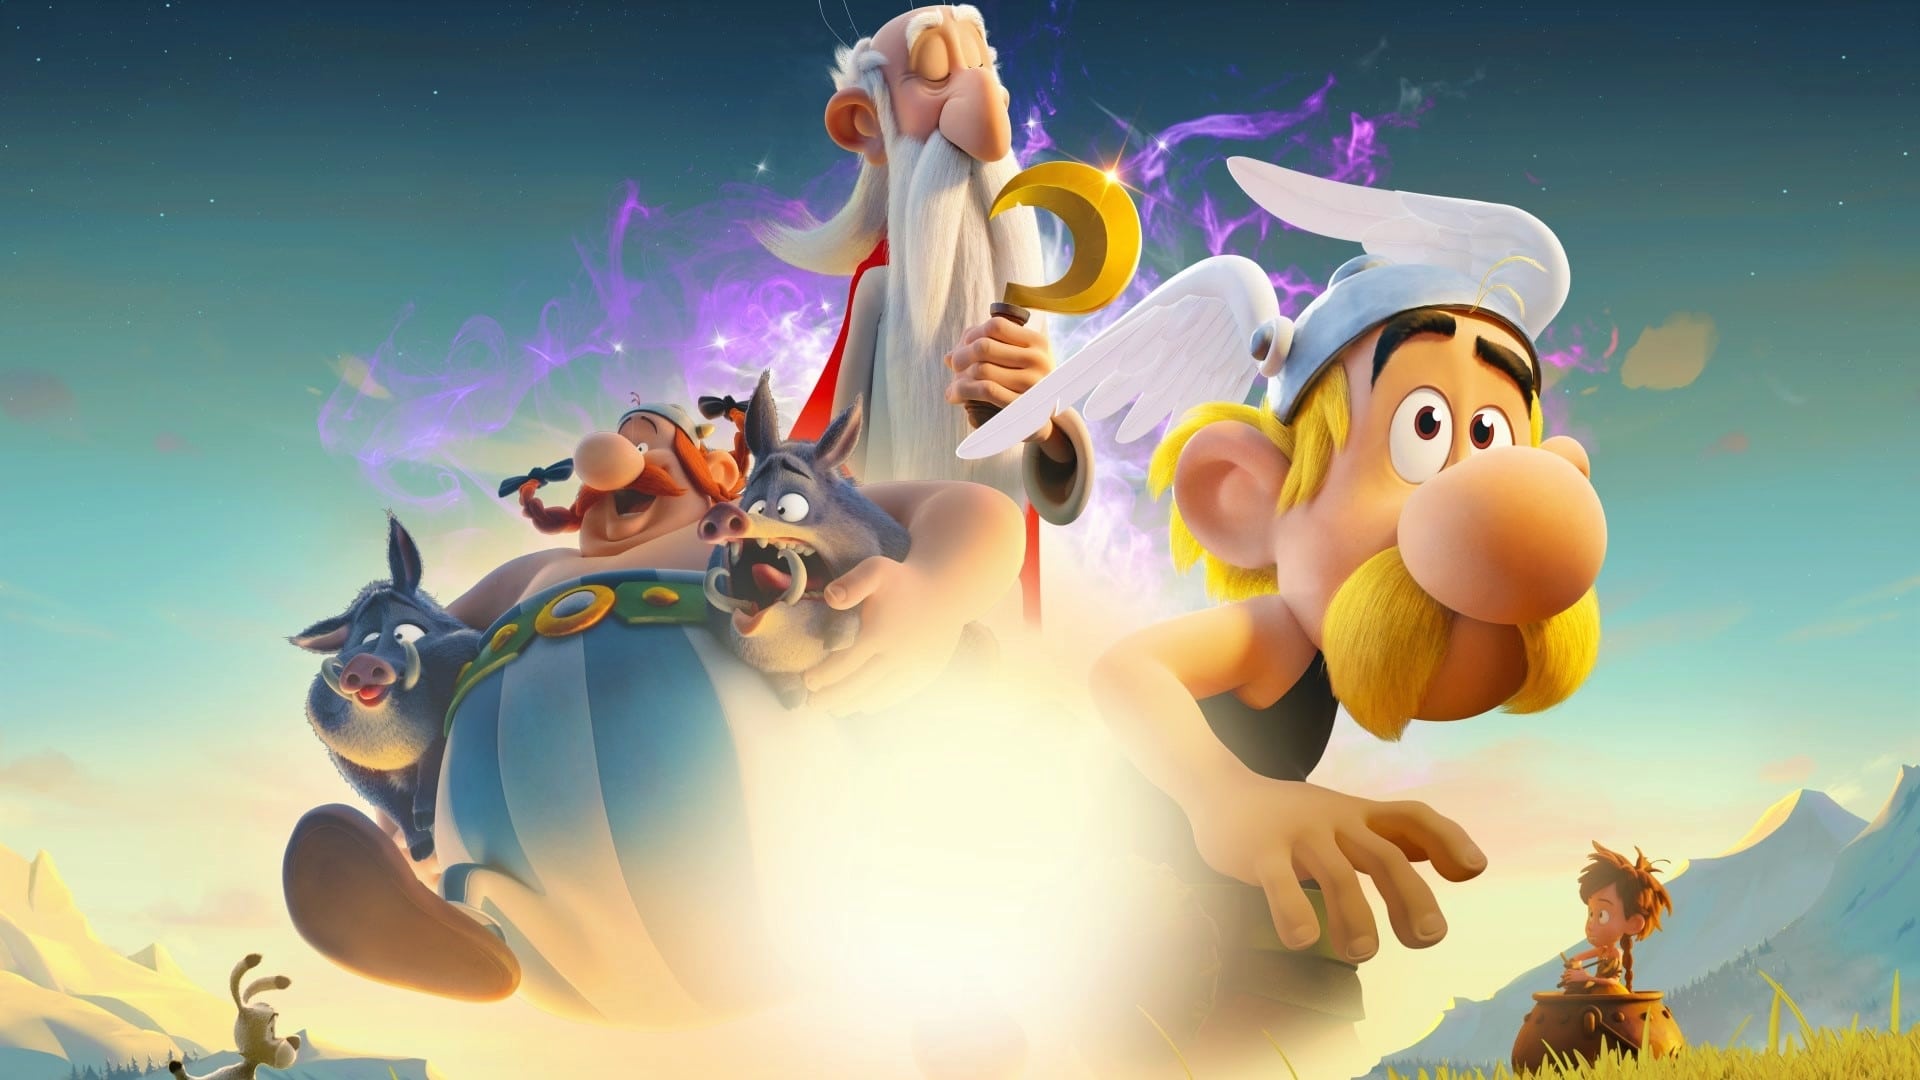 Streaming Asterix: The Secret of the Magic Potion (2018) Online - Asterix The Secret Of The Magic Potion